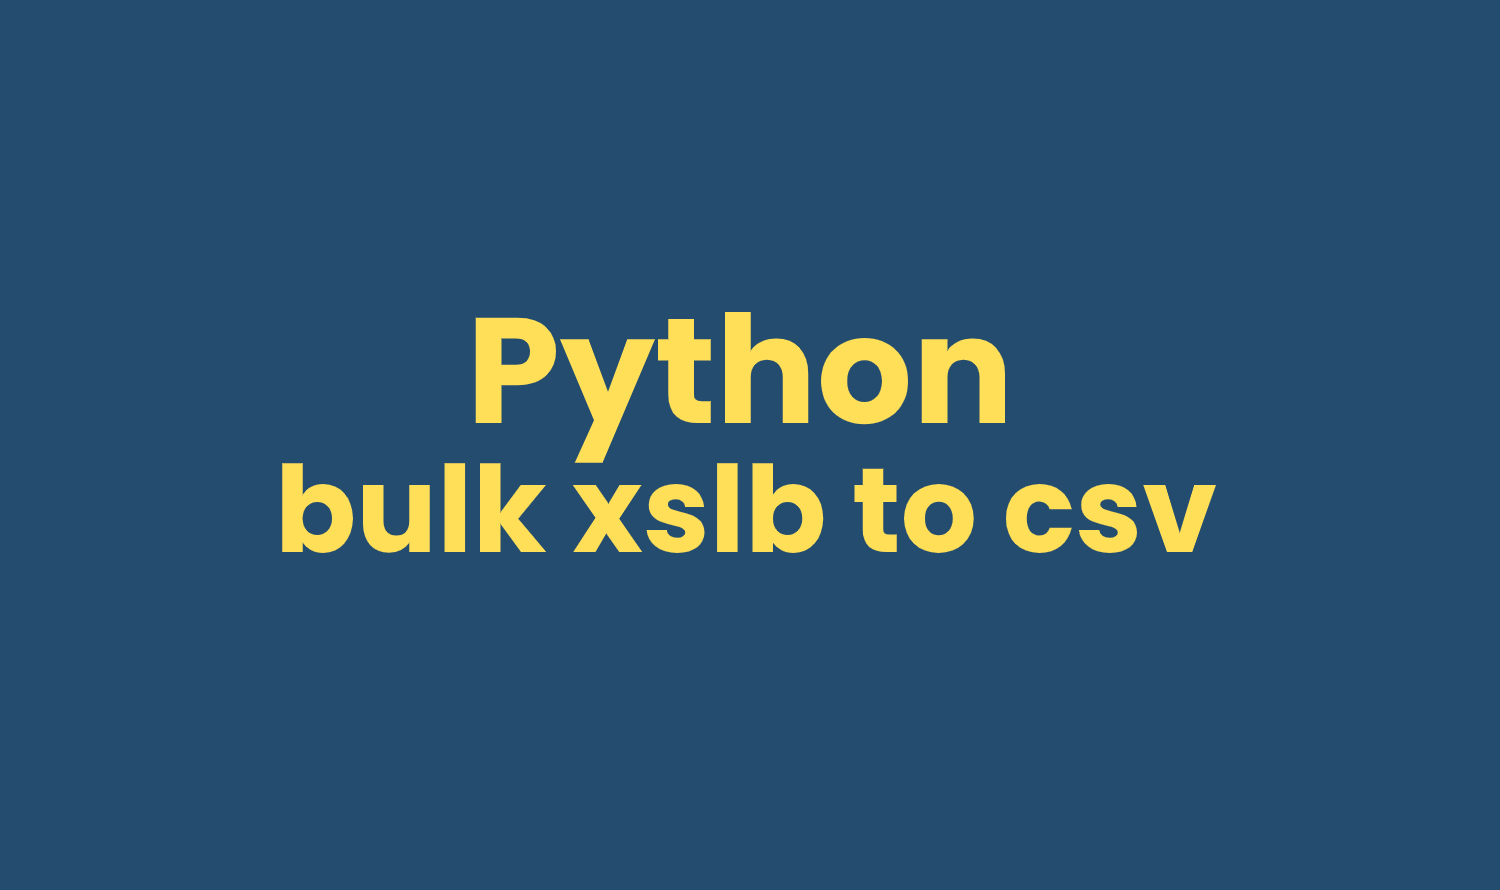 How to convert multiple xslb files to csv with python